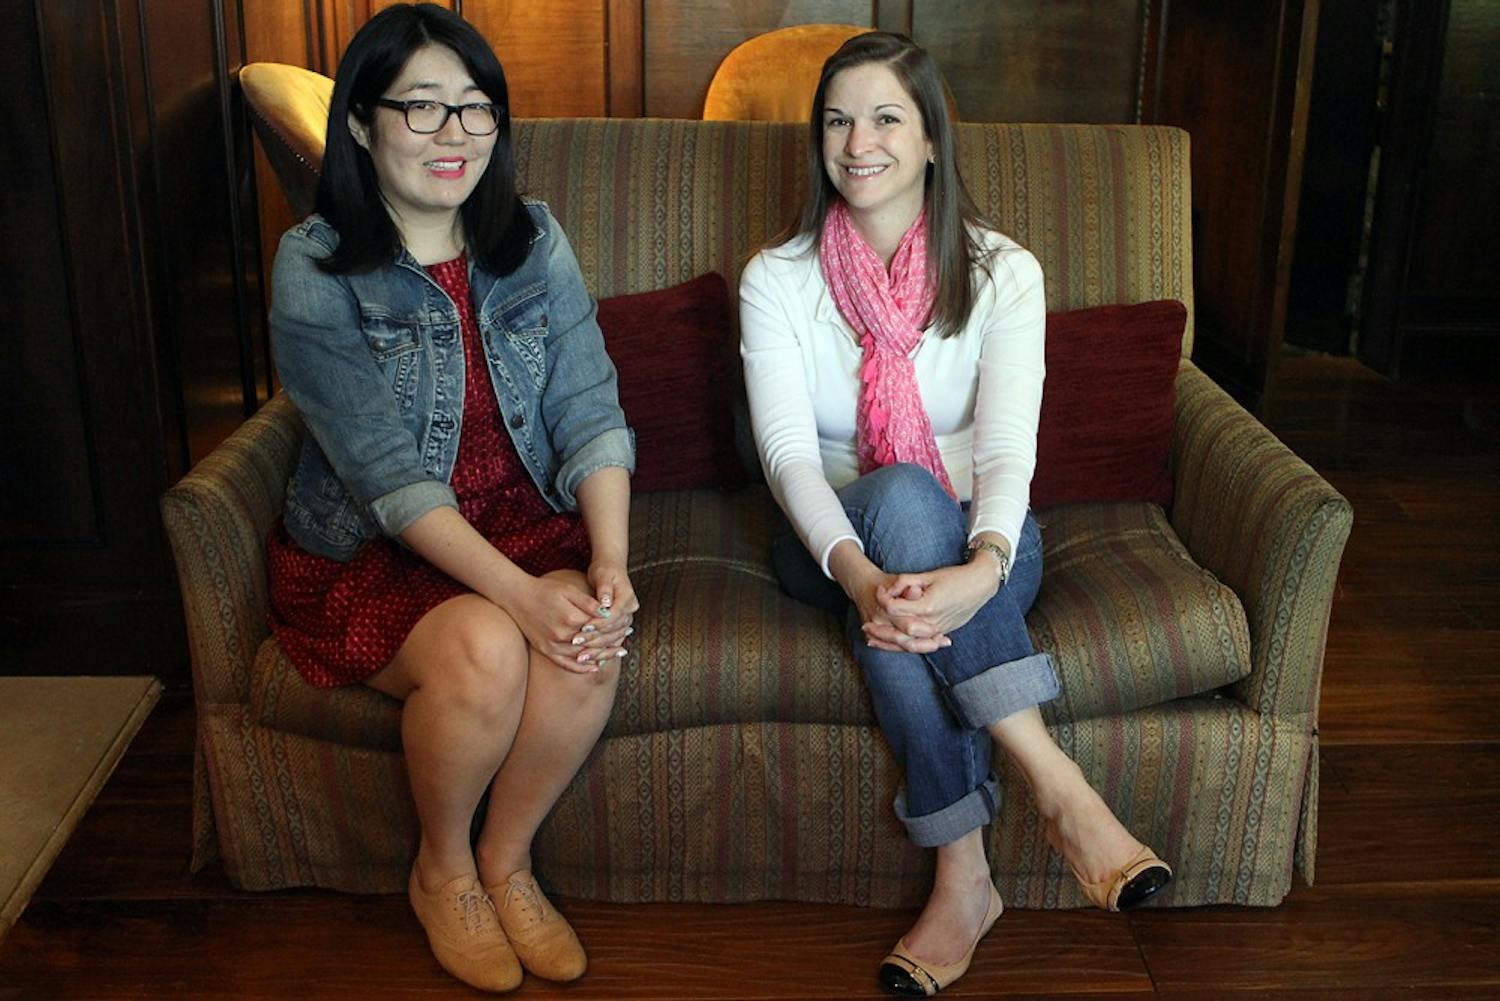 Authors Jenny Han and Sarah Dessen will speak at Flyleaf Books Thursdsay night. Han will discuss her new YA novel "To All the Boys I've Loved Before," and  Dessen will discuss her eleventh novel, "The Moon and More."